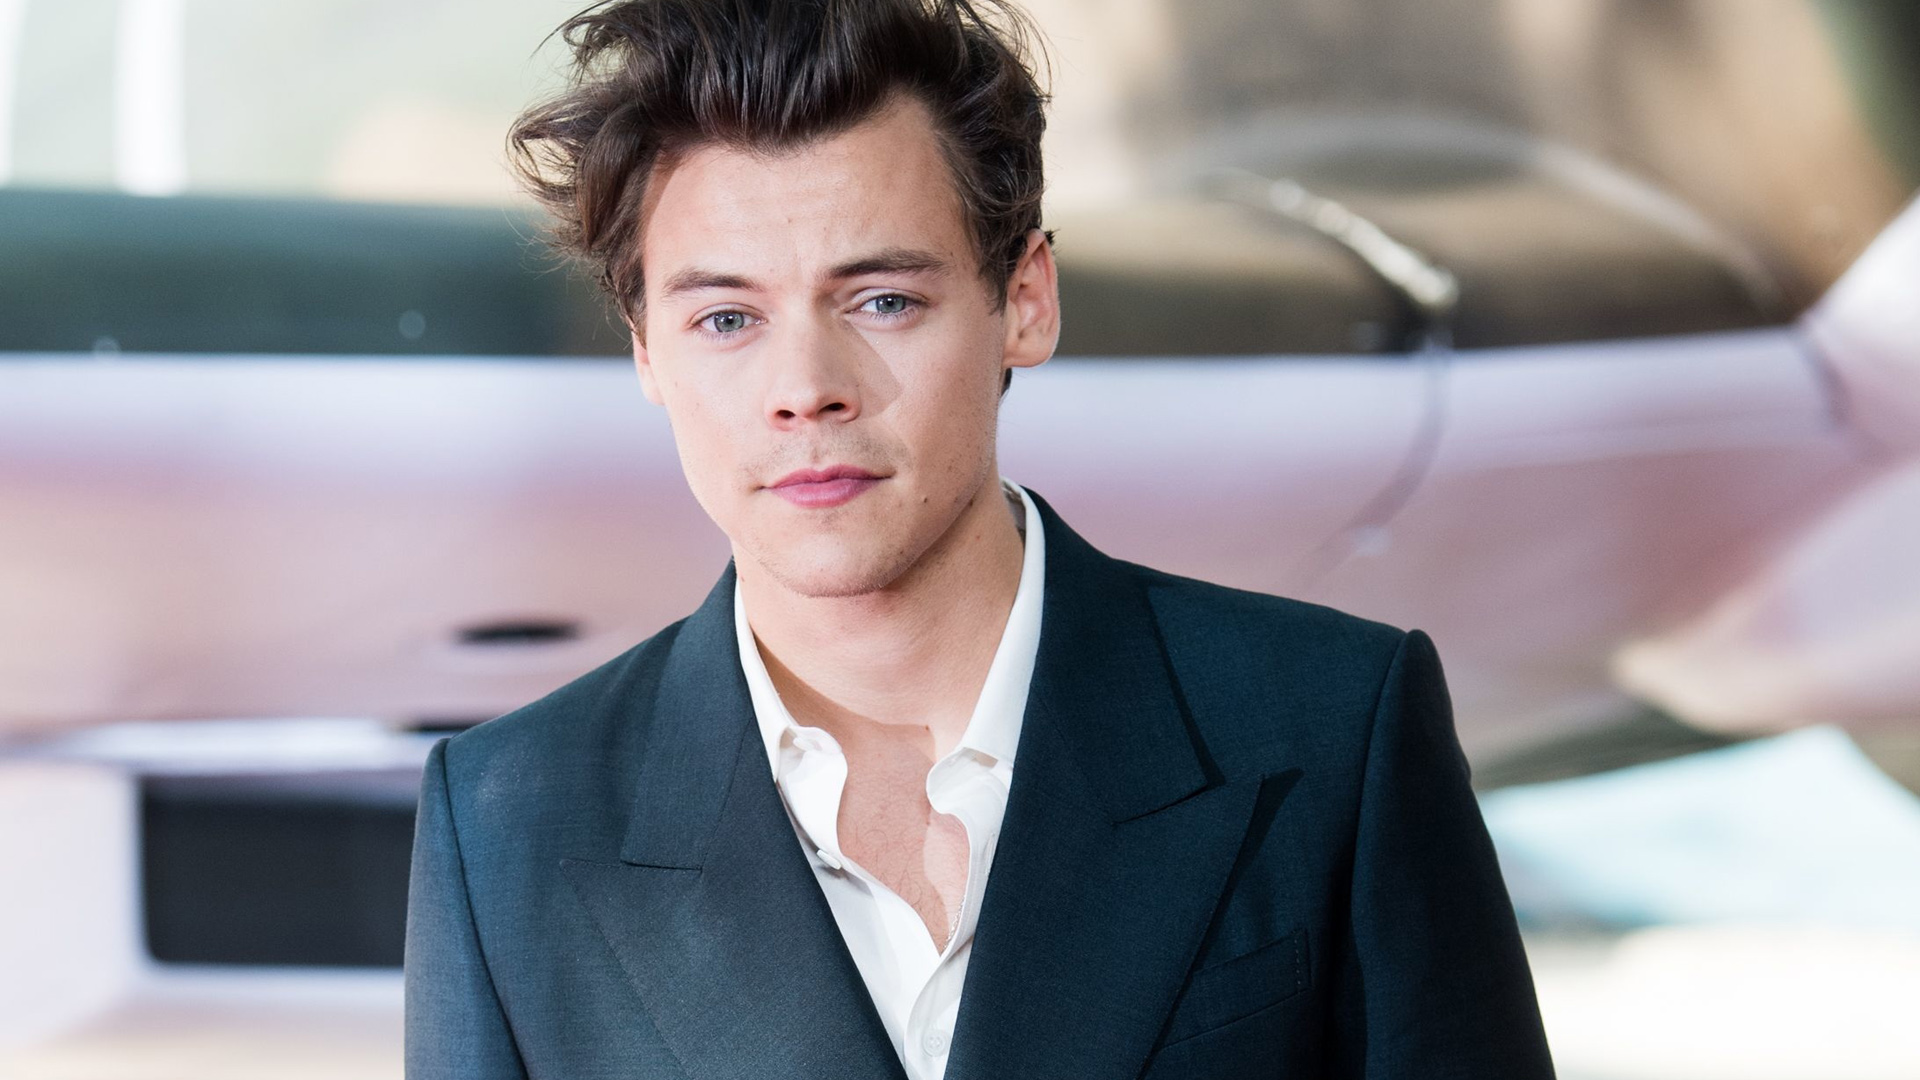 Is all of 1989 about Harry Styles?